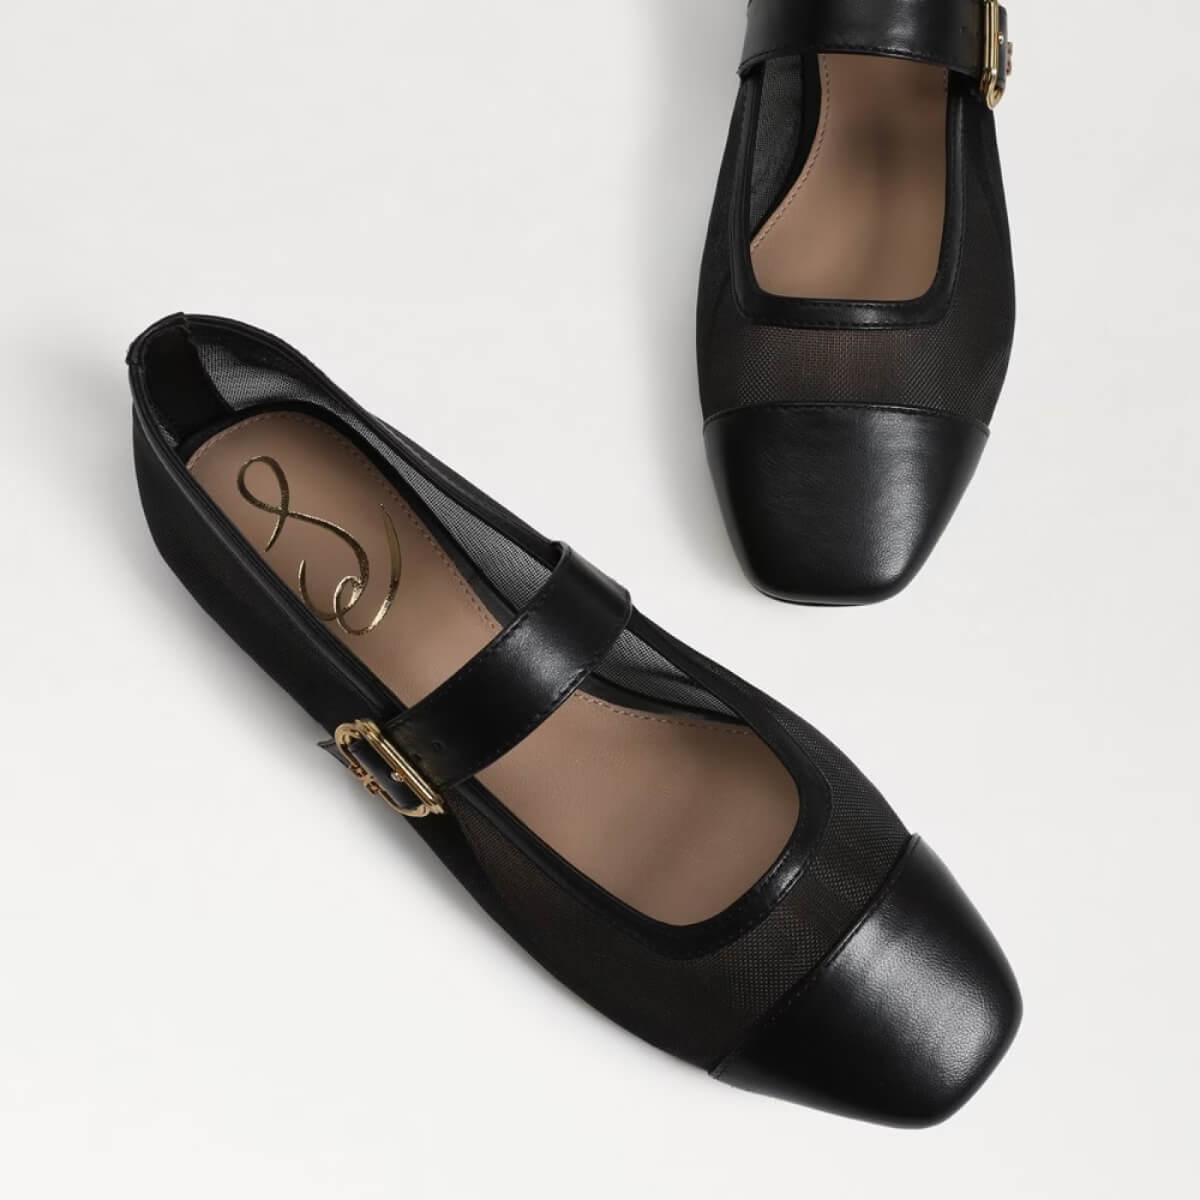 Sam Edelman Miranda Mary Jane Flat black top | MILK MONEY milkmoney.co | cute shoes for women. ladies shoes. nice shoes for women. footwear for women. ladies shoes online. ladies footwear. womens shoes and boots. pretty shoes for women. beautiful shoes for women.